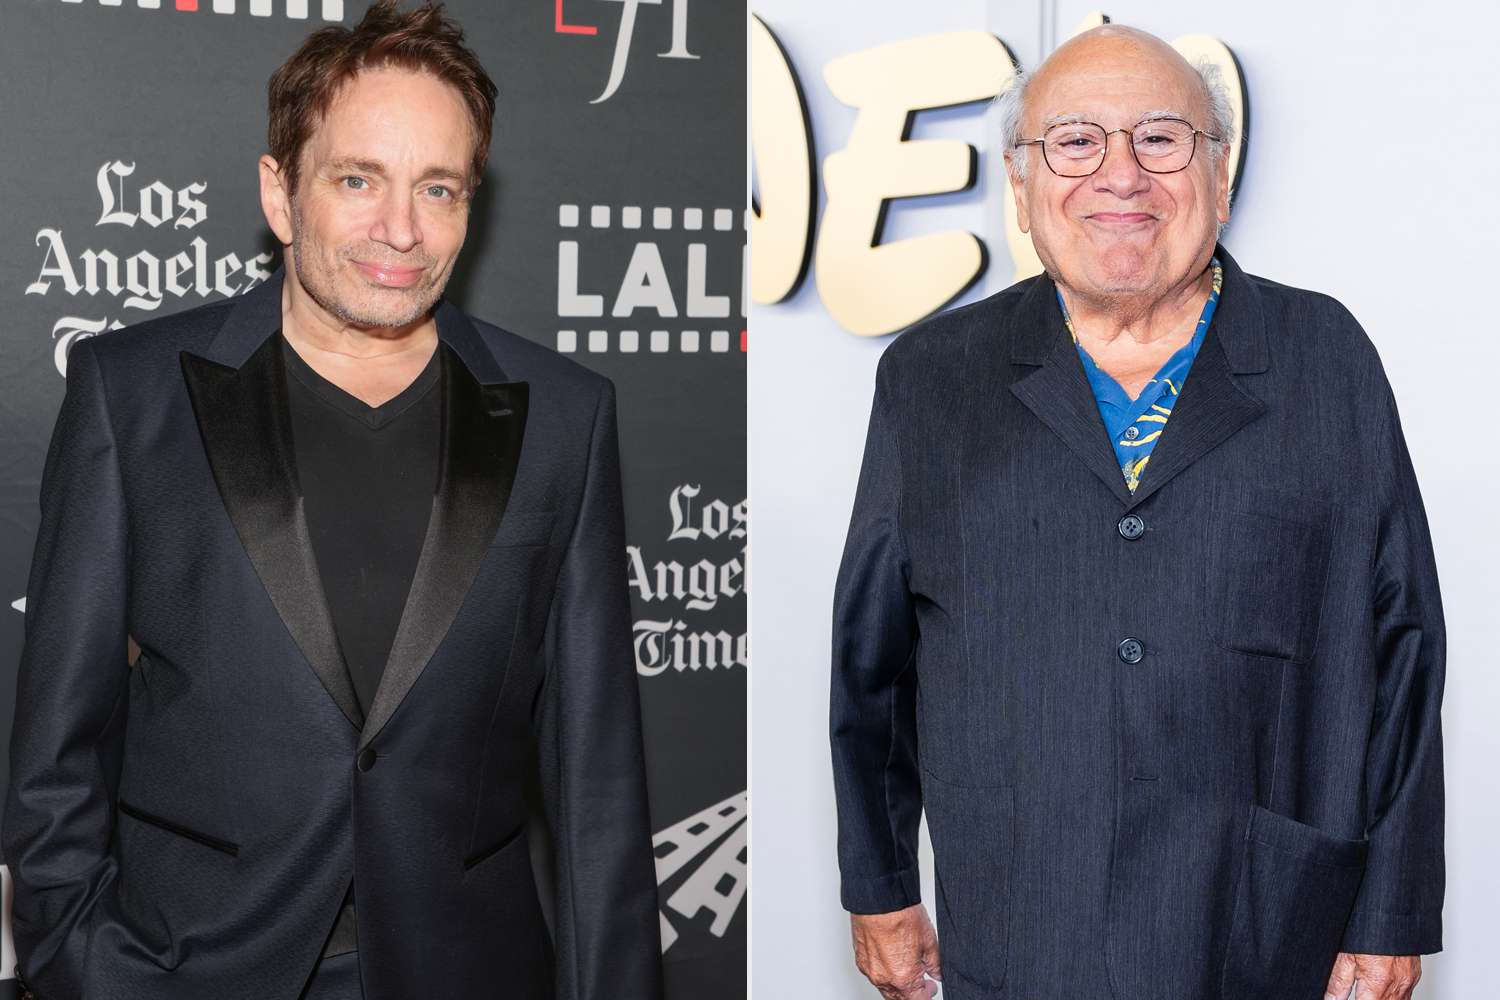 Chris Kattan lived in a haunted house once owned by Danny DeVito, says a friend 'swore they saw' a ghost